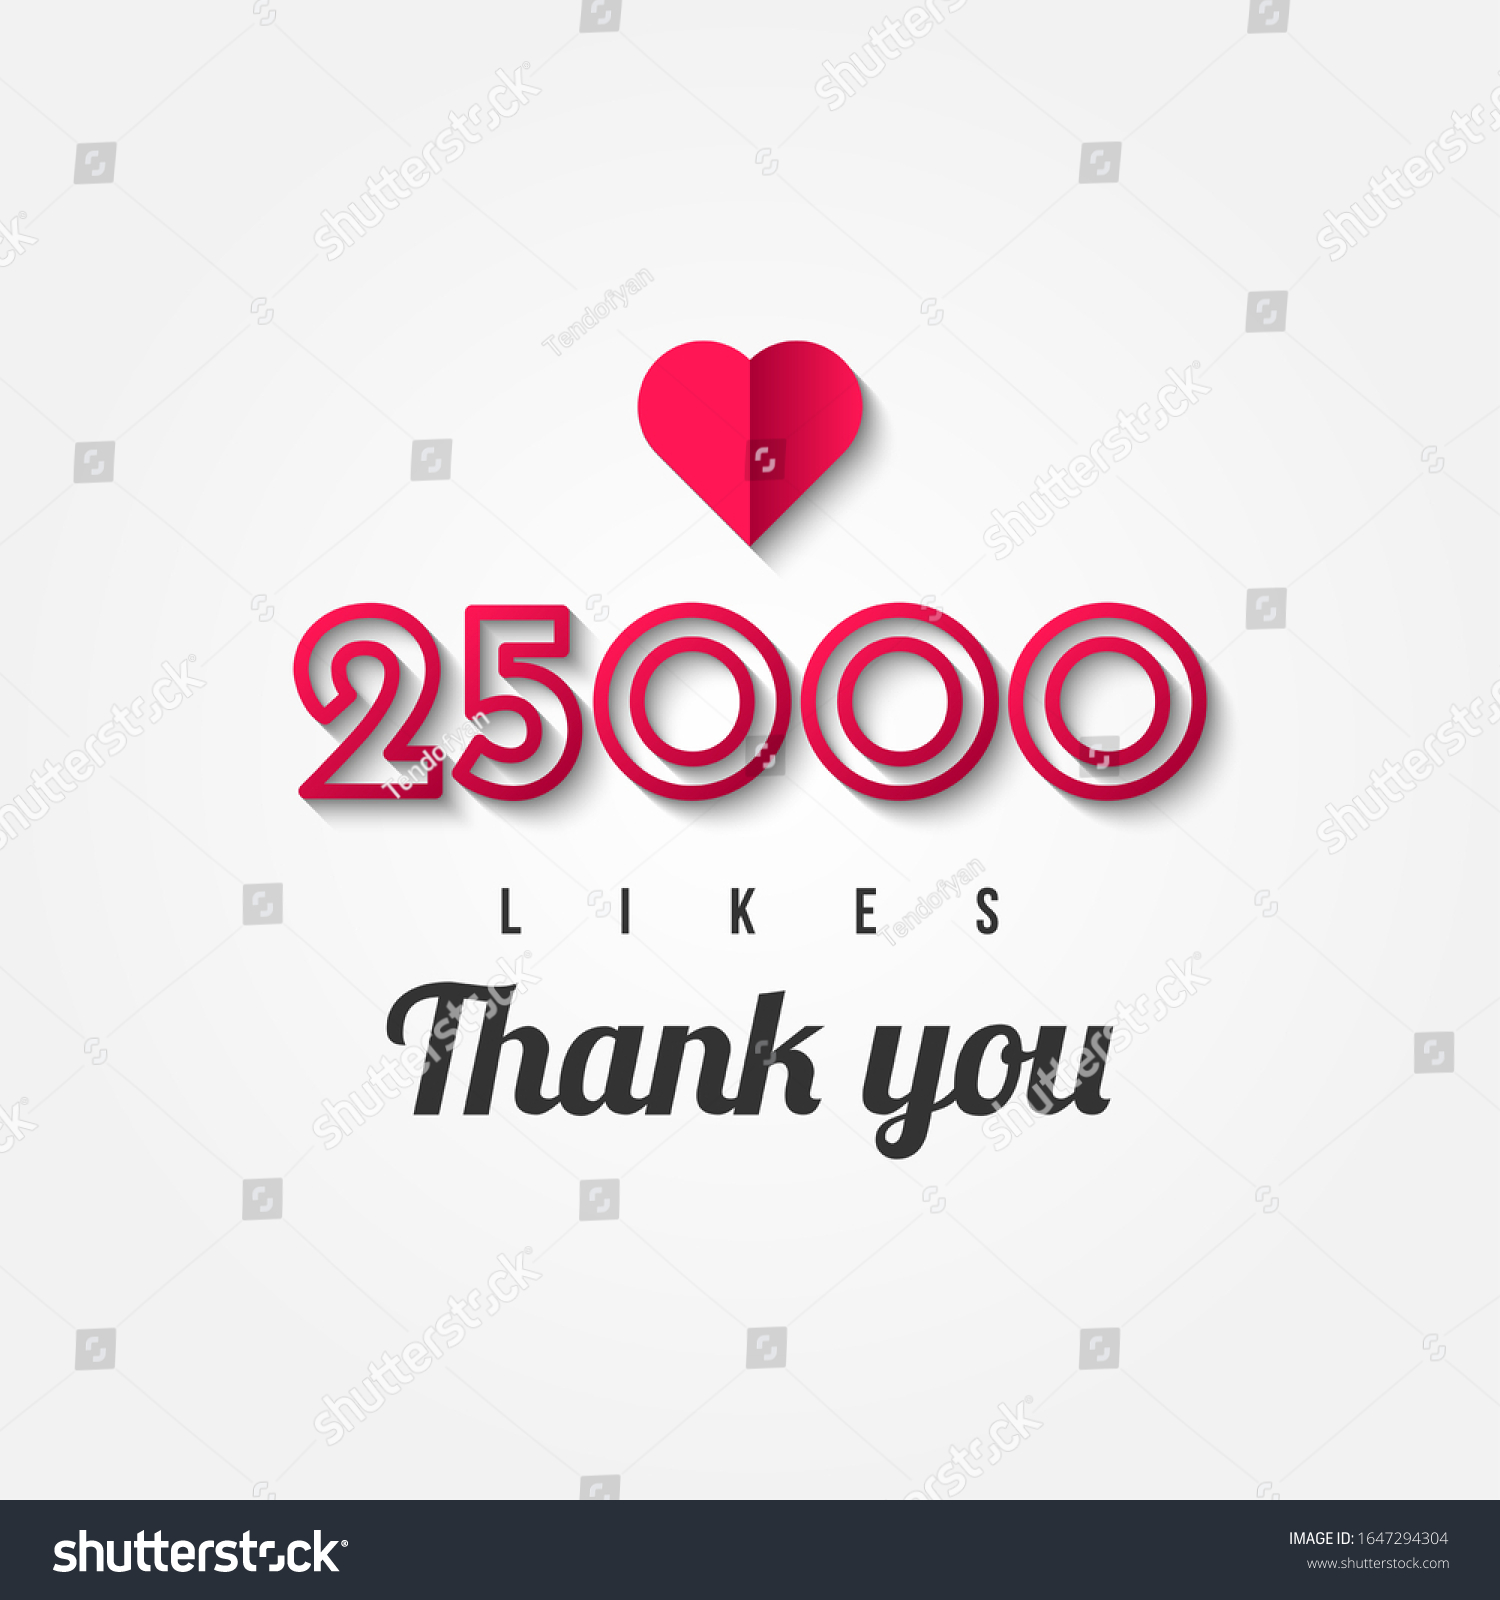 SVG of Thank You 25000 Likes with heart icon Vector Illustration Template Design svg